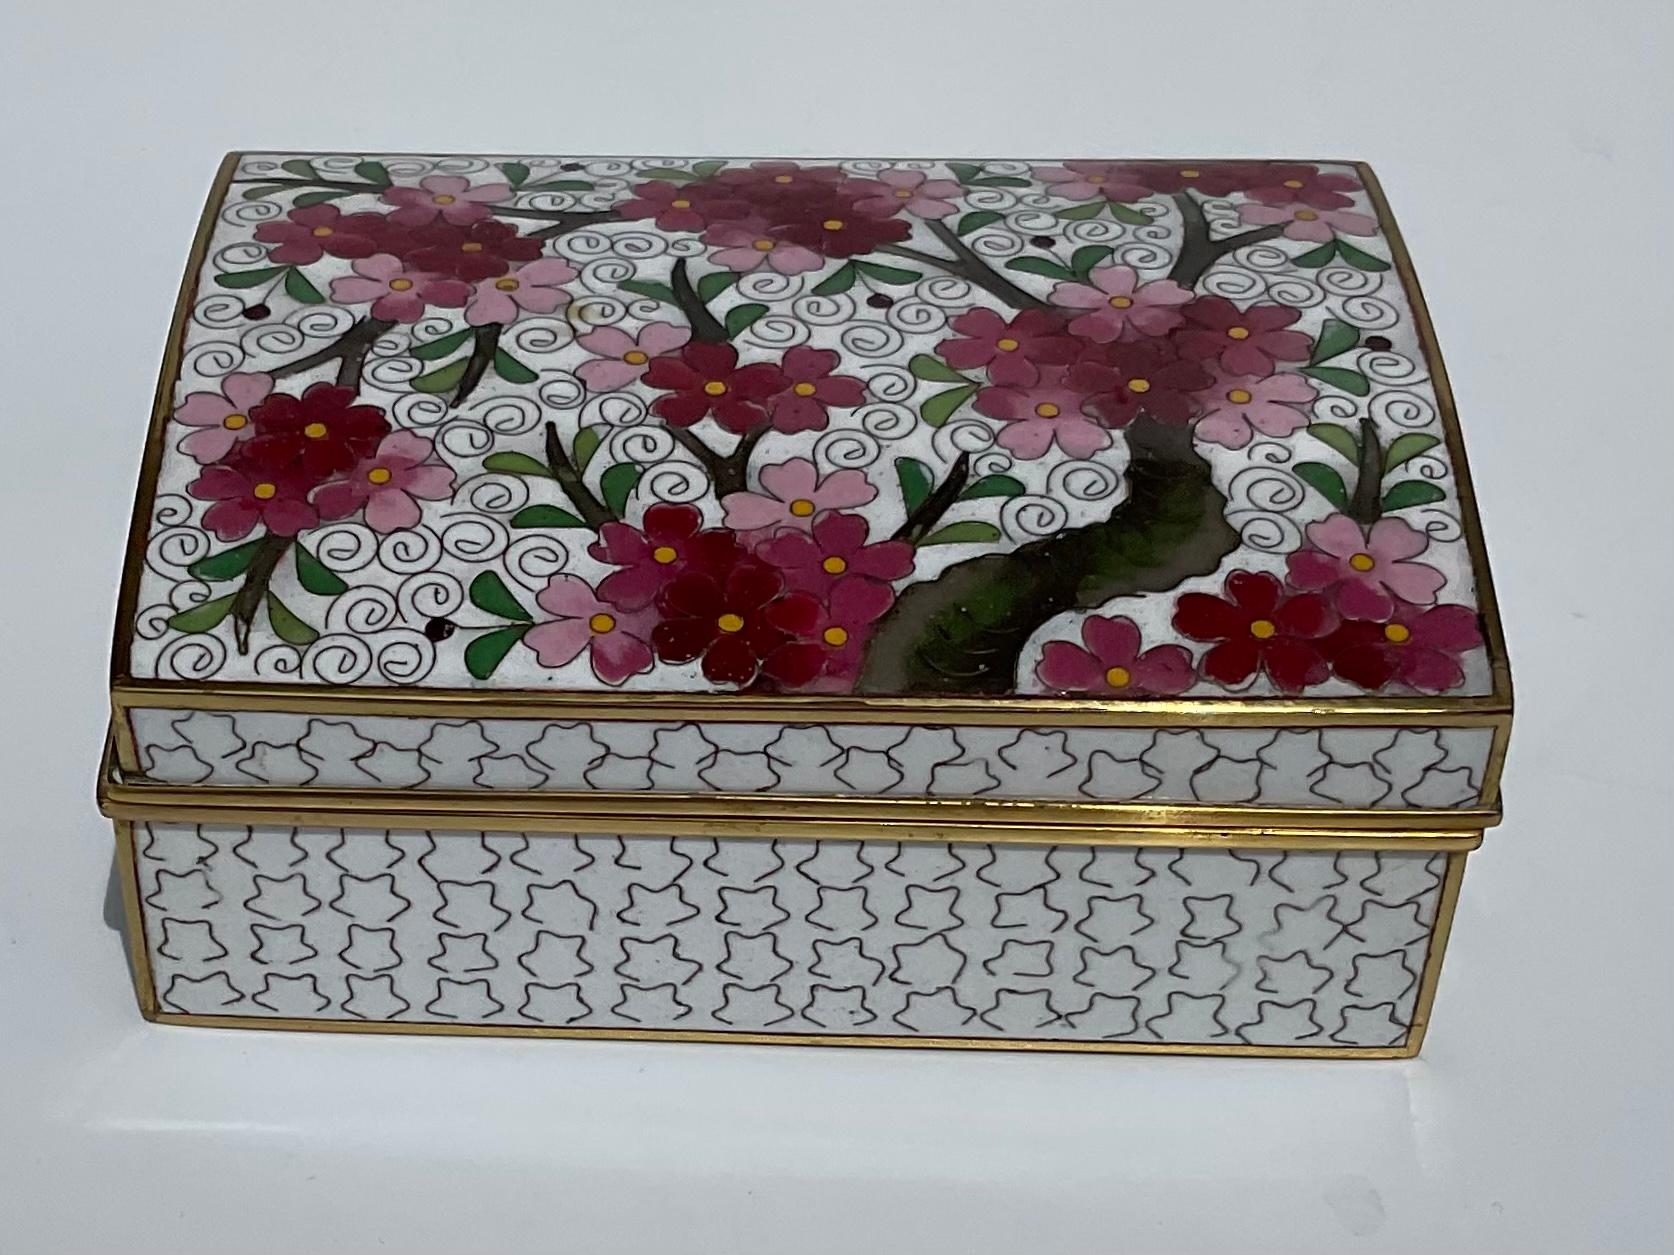 Ando Signed Japanese flowering tree box Cloisonne with amazing design In multi color with geometric detail.